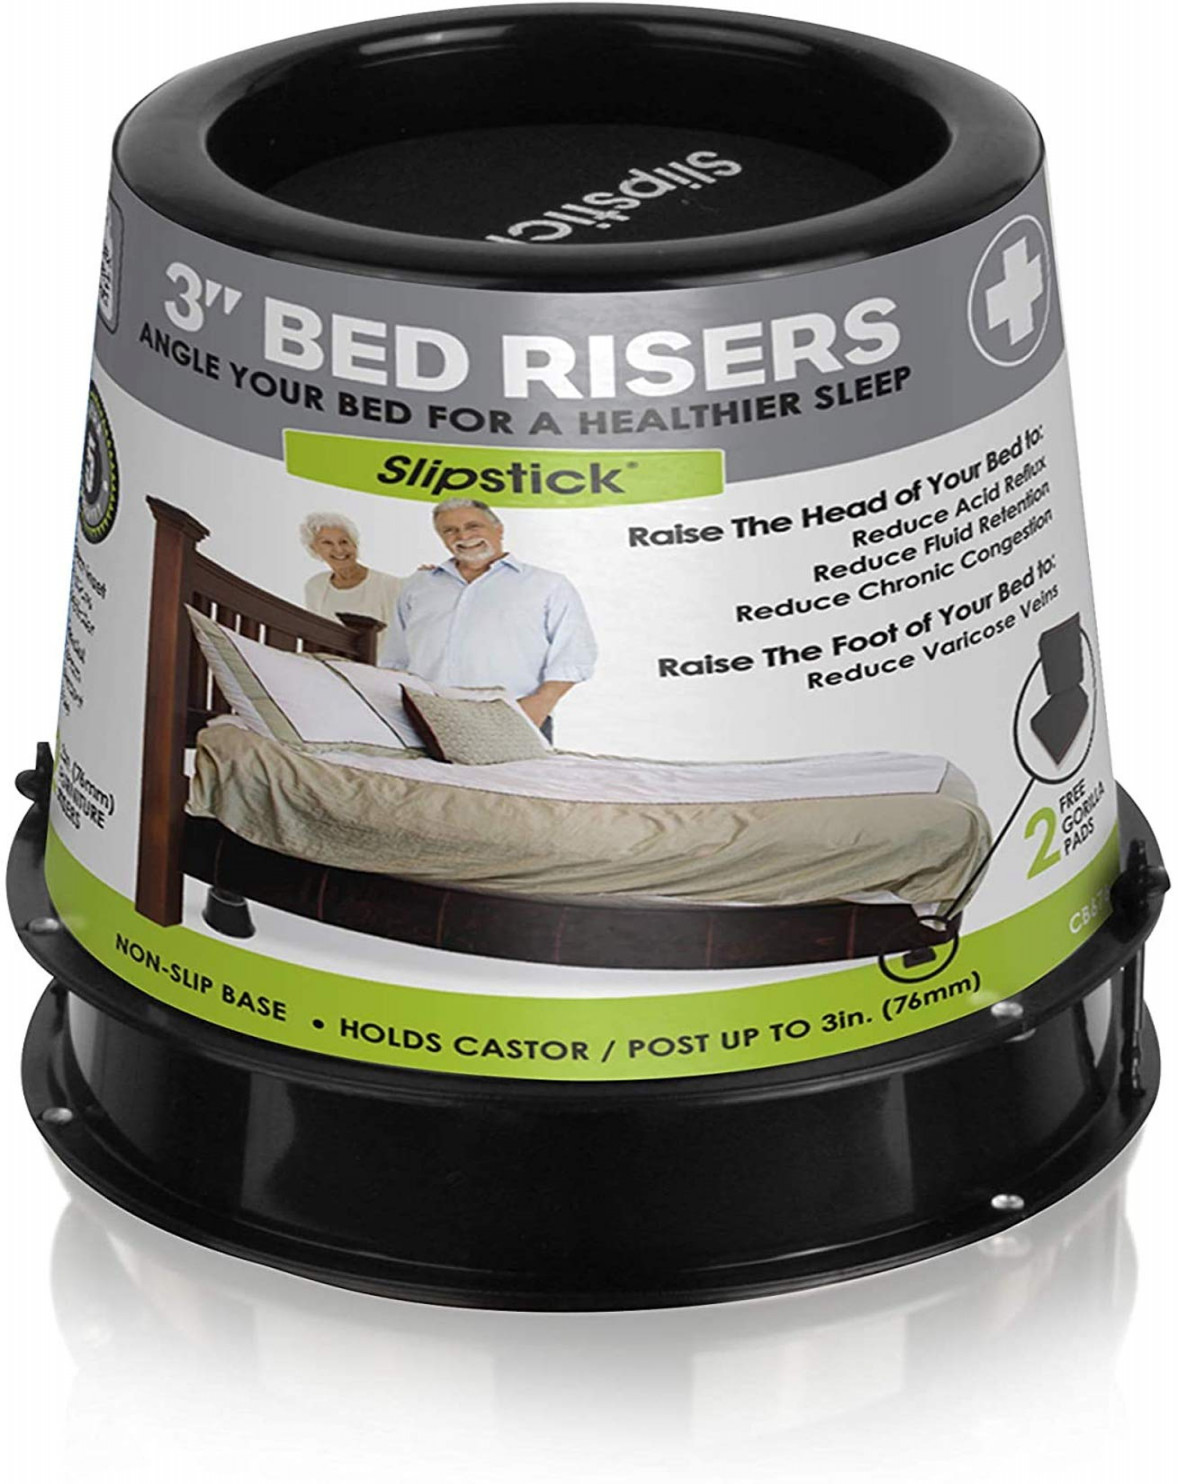 Elevate Head Of Bed For Acid Reflux